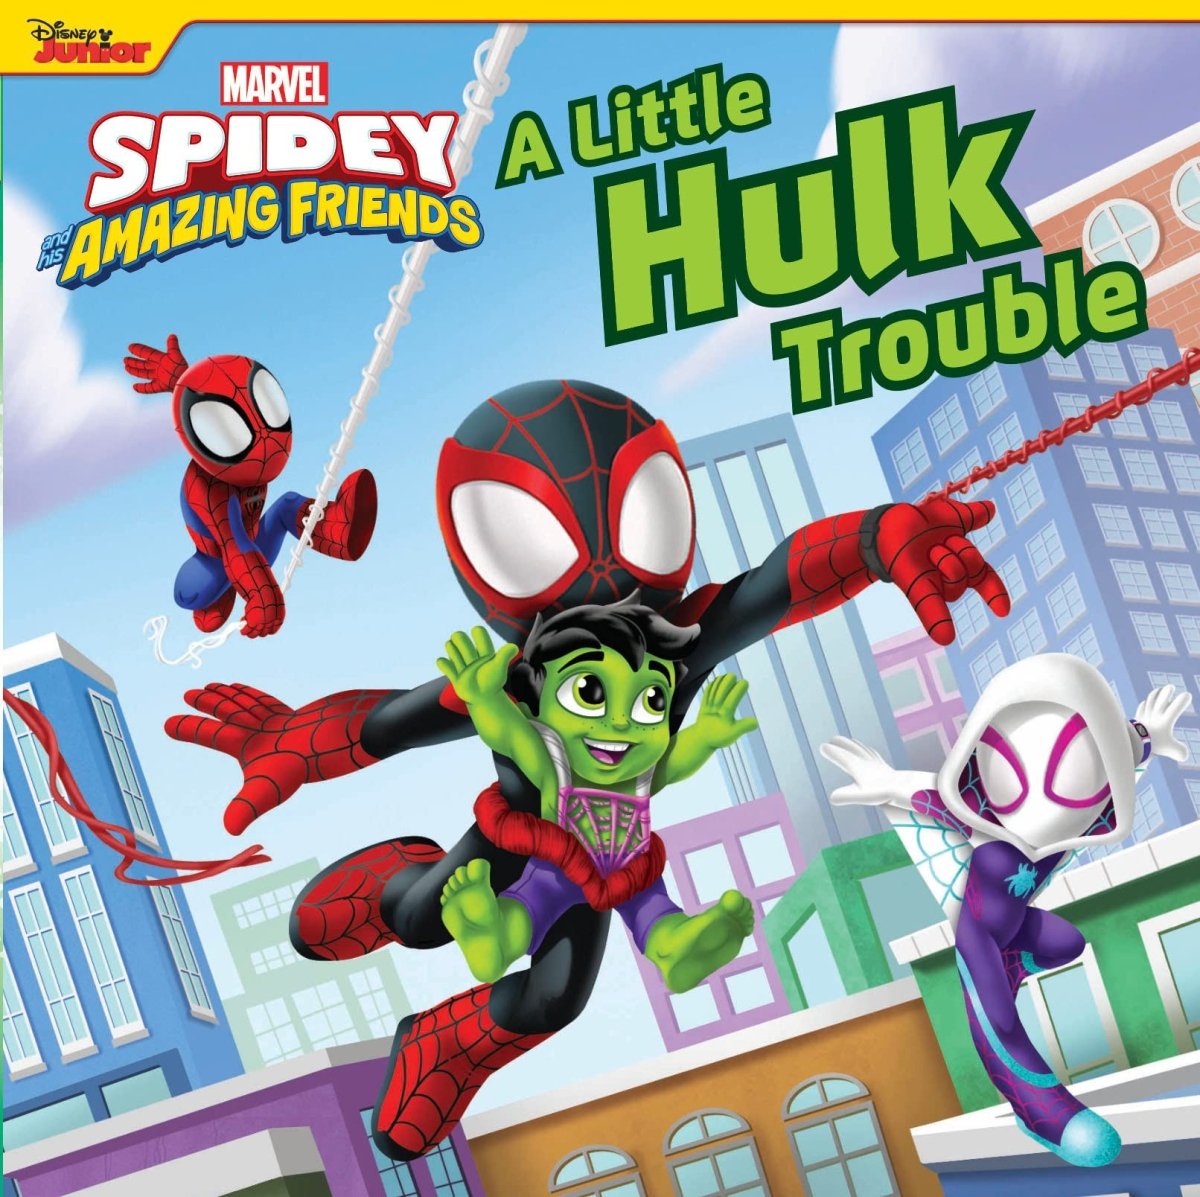 Spidey And His Amazing Friends: A Little Hulk Trouble - Walt's Comic Shop